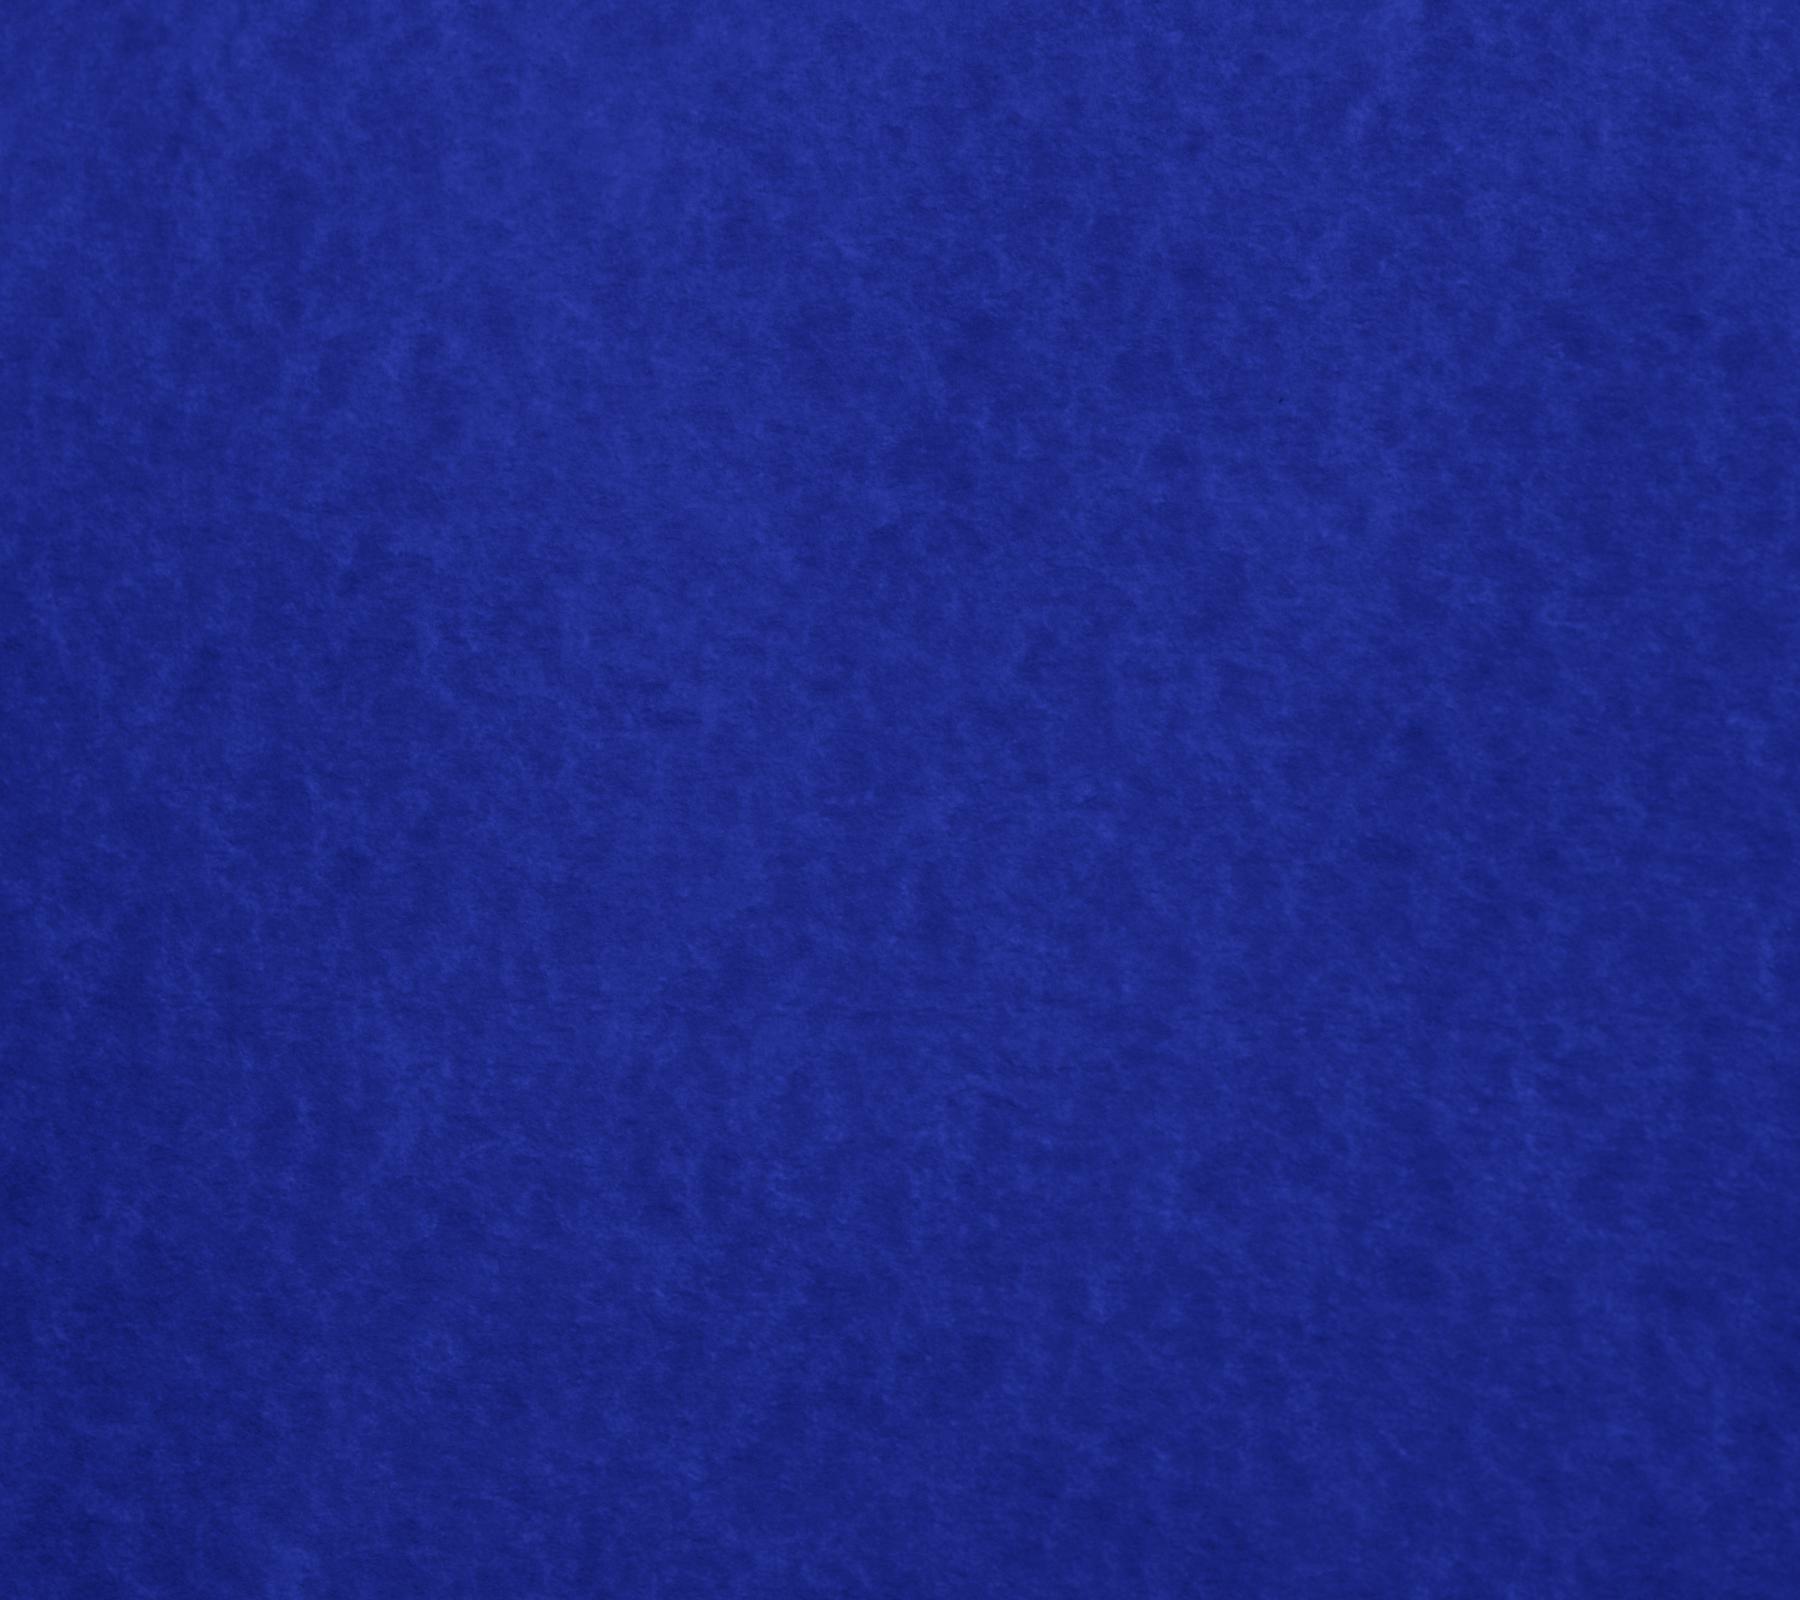 Blue Background Photos and tileable wallpapers for your web page ...